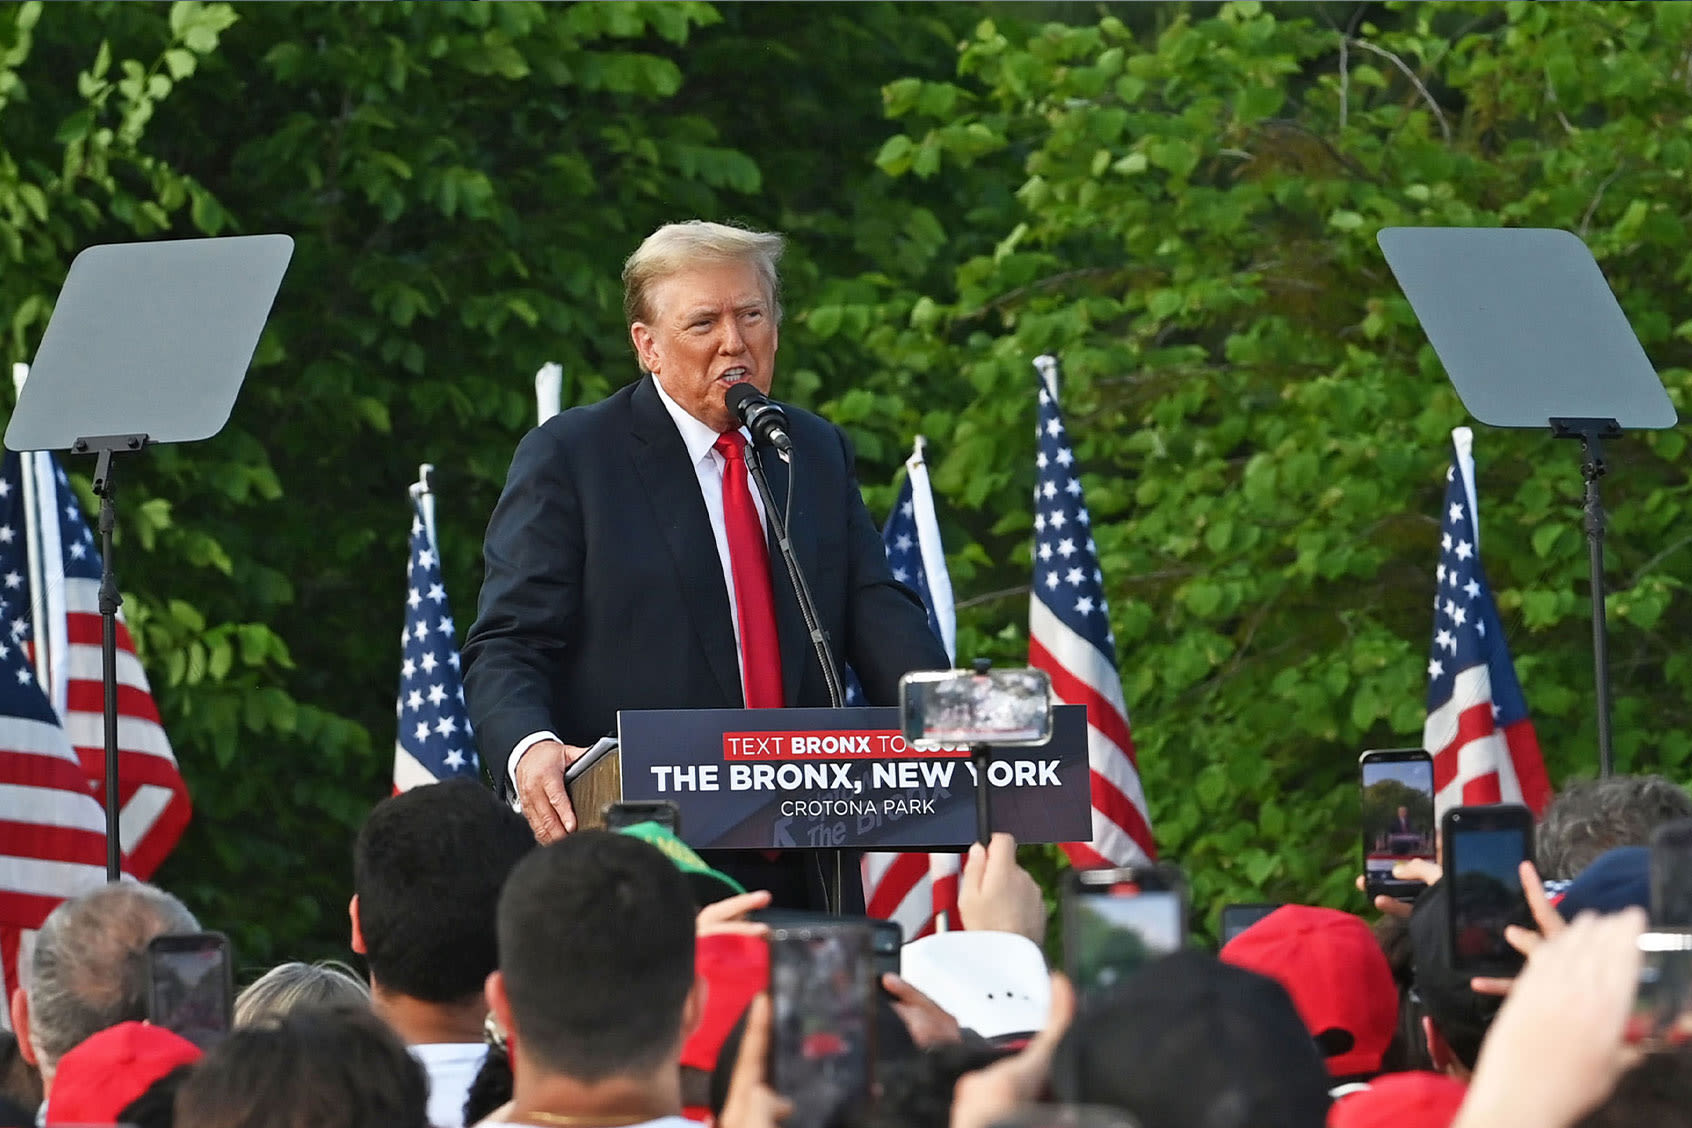 "Red flag": Expert says Trump won't win NY — but his Bronx rally should be a "wake-up" call for Dems